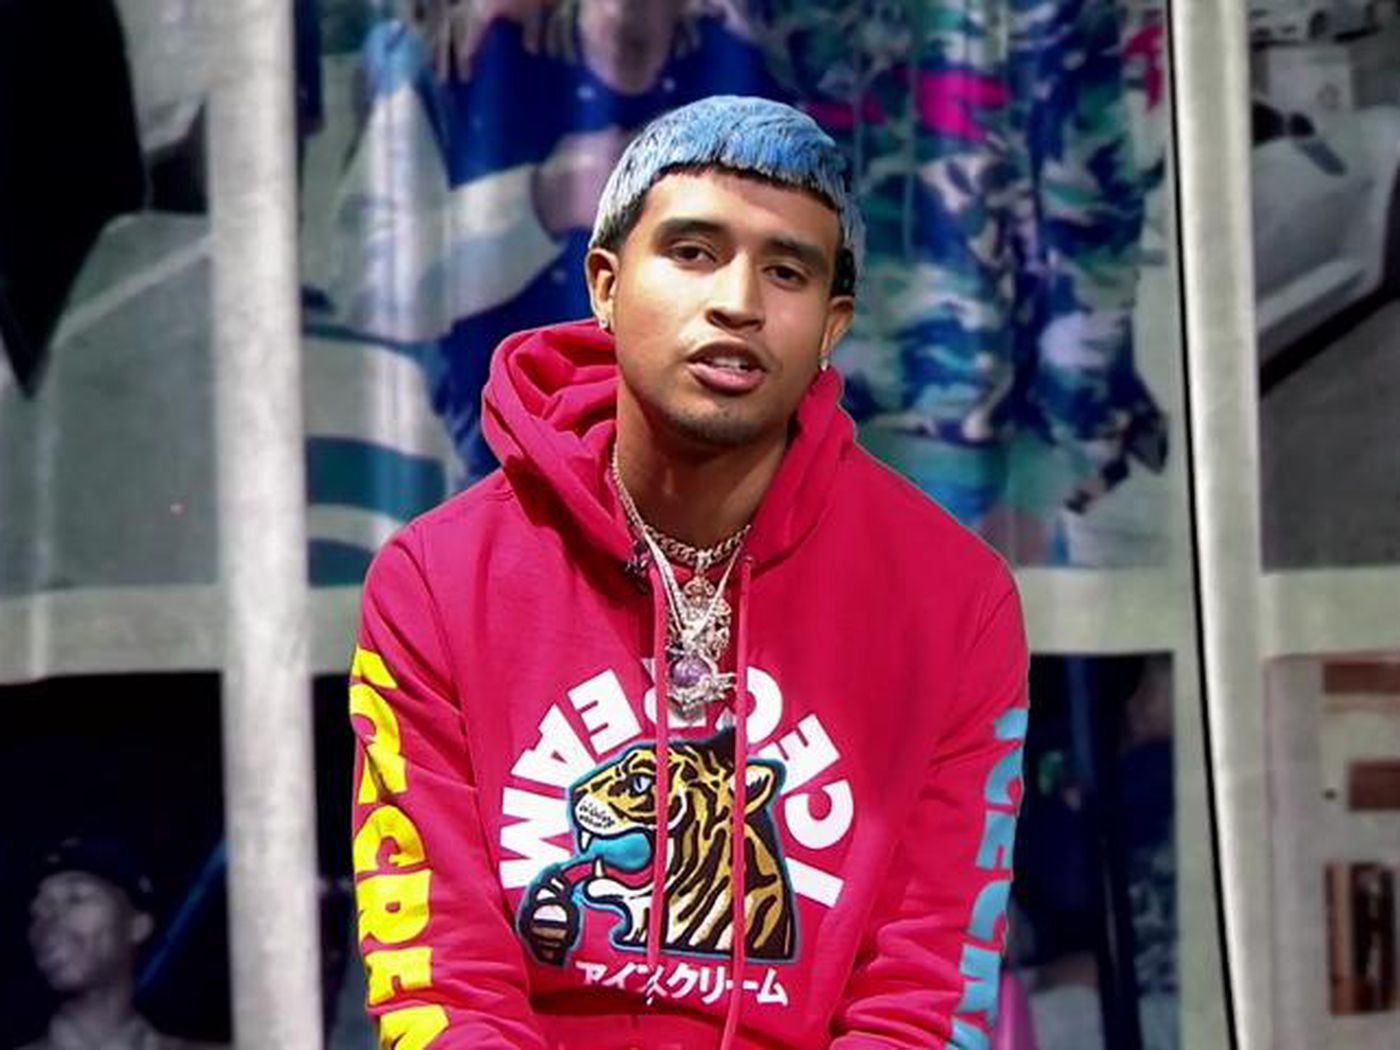 Kap G Talks His Childhood Pharrell And More Memory Lane Revolt Revolt He is best known for his hit single girlfriend which was released in his mixtape el southside in 2016. kap g talks his childhood pharrell and